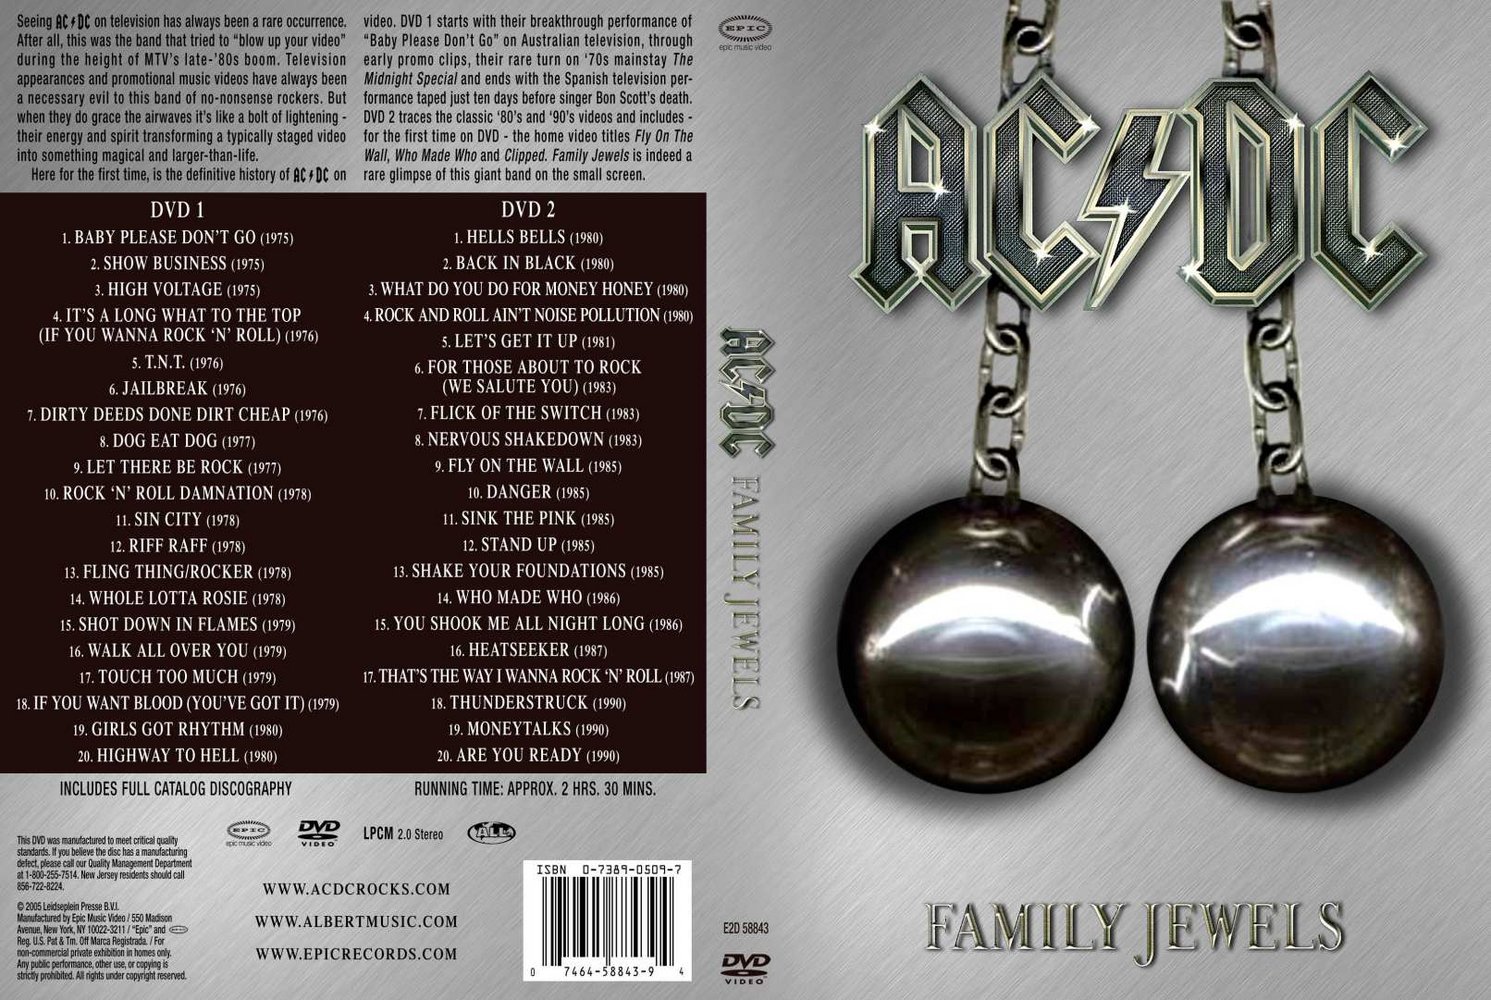 ACDC - Family Jewels - ACDC - Family Jewels - Full.jpg